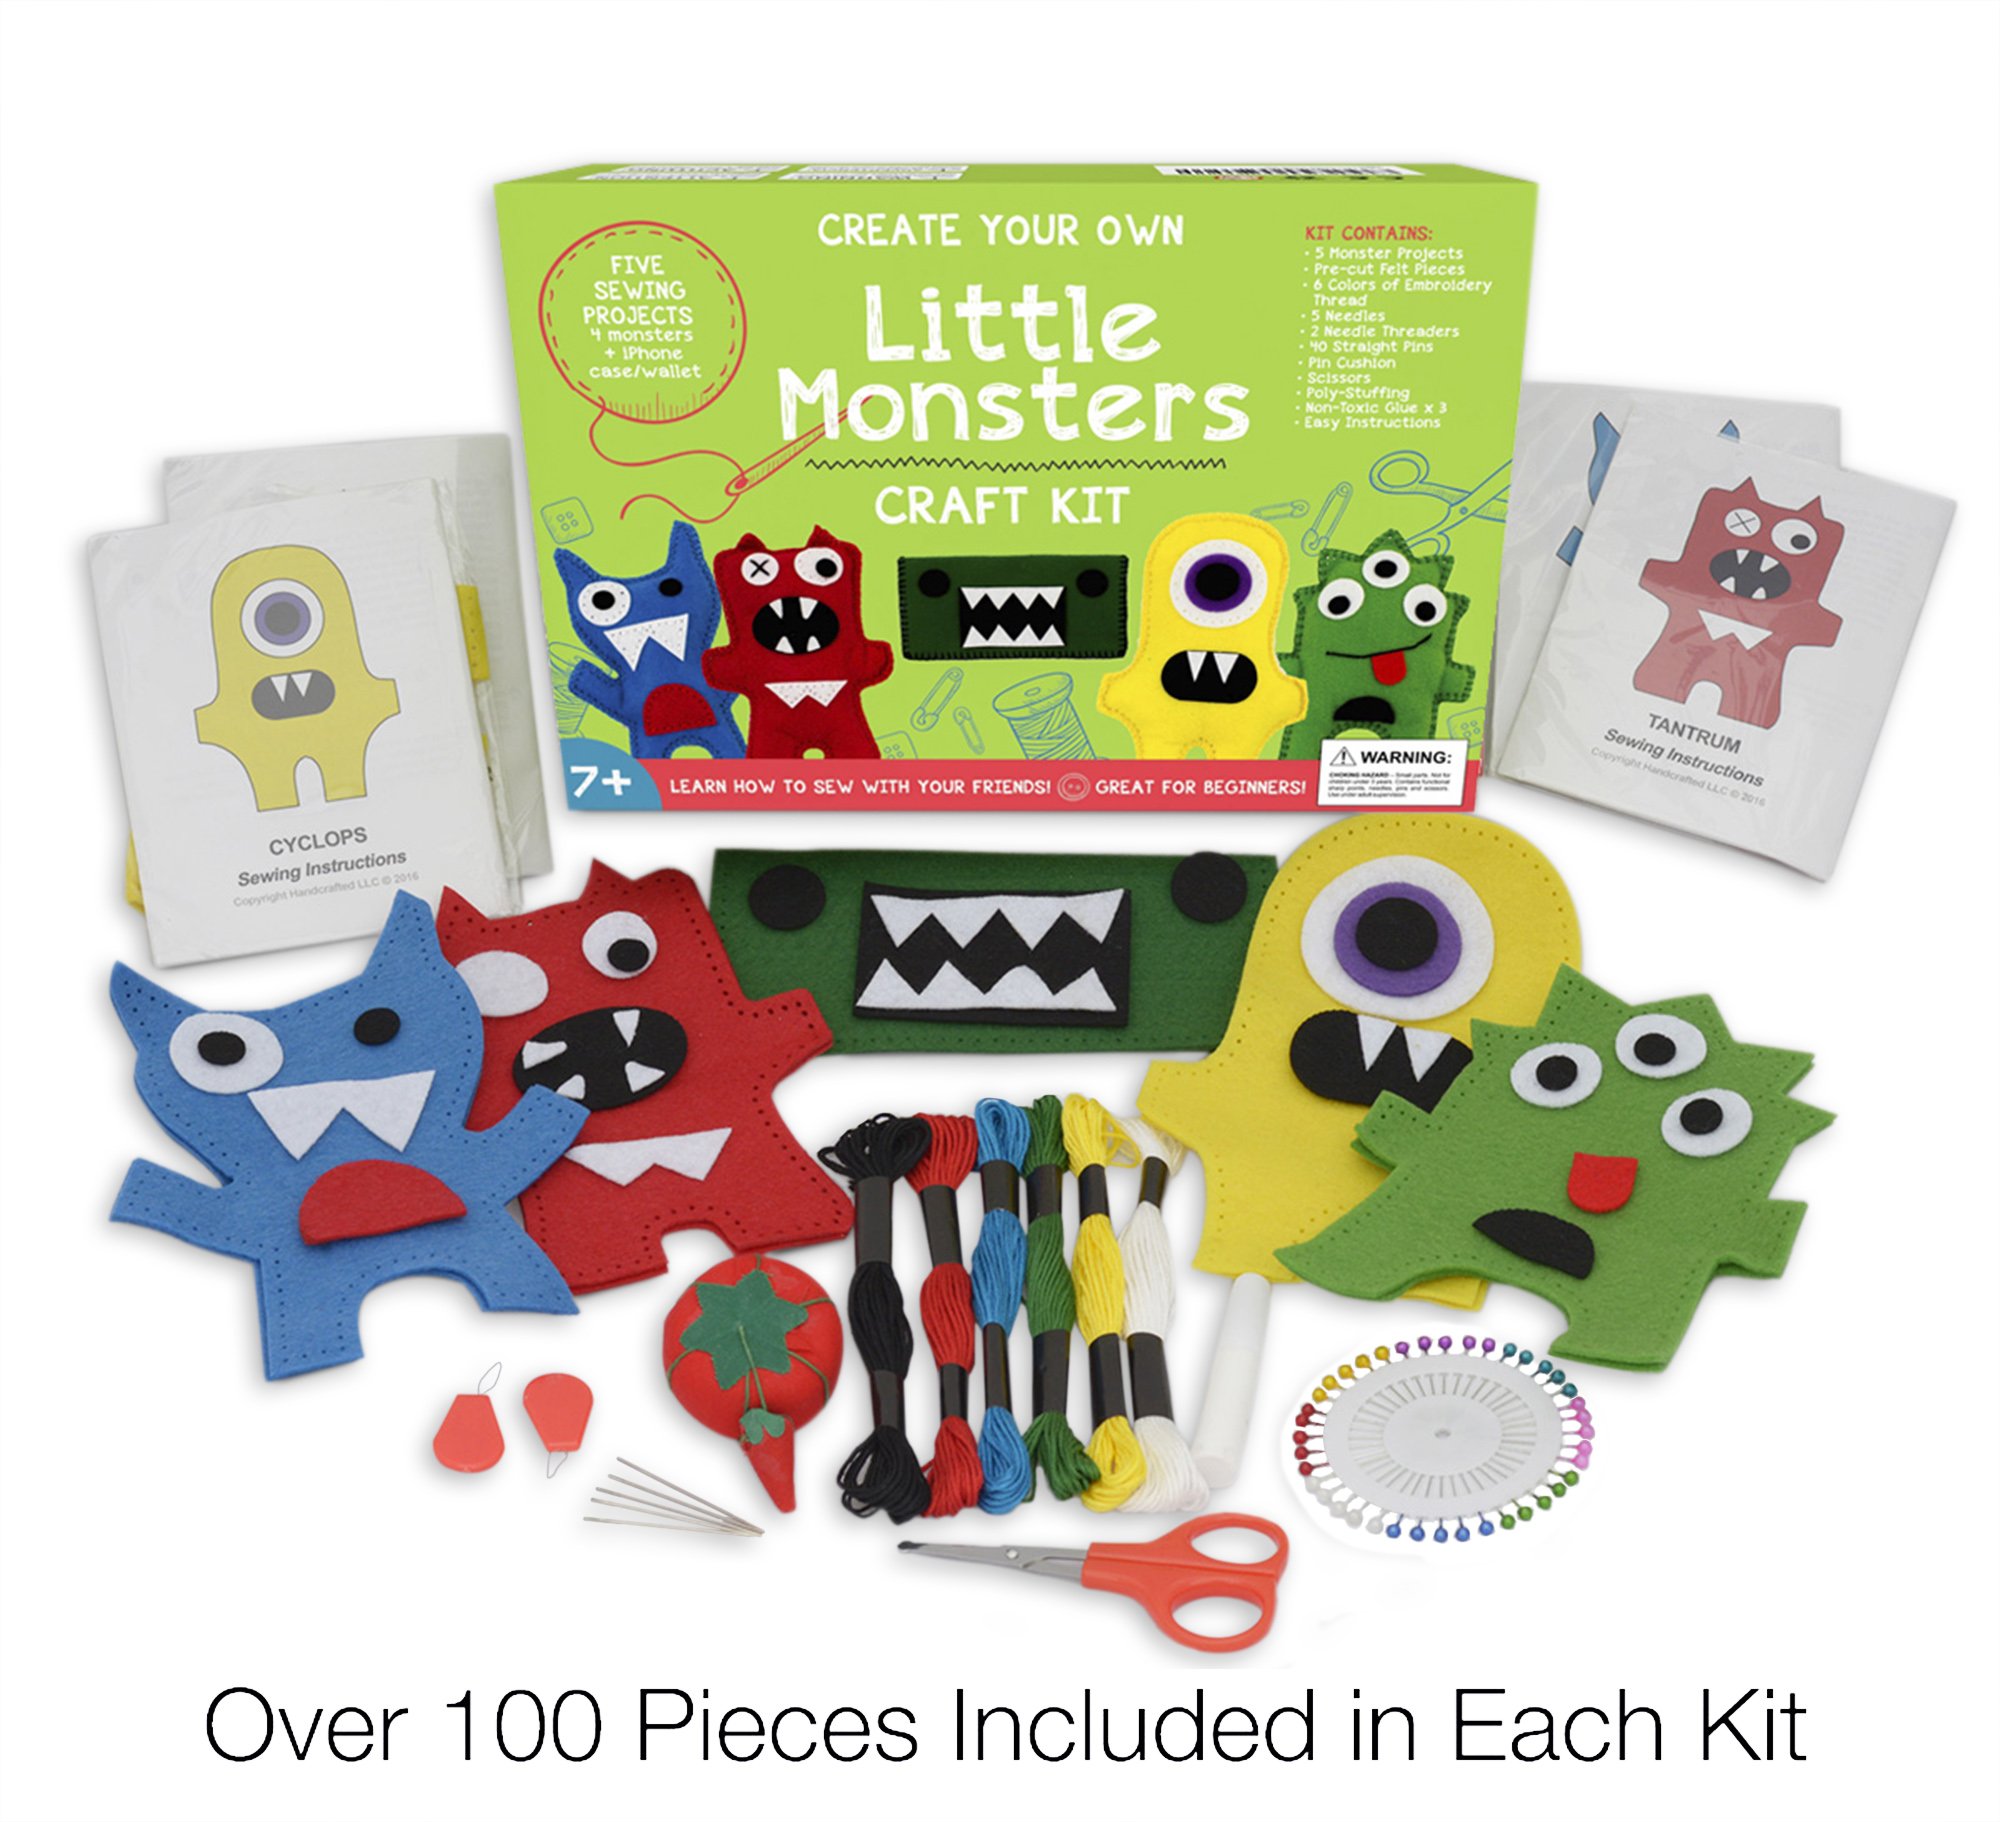 Little Monsters Beginners Sewing Kit - Awesome Gift for Girls & Boys Ages 7 to 13, Best Educational Craft Kit & Toys for Kids